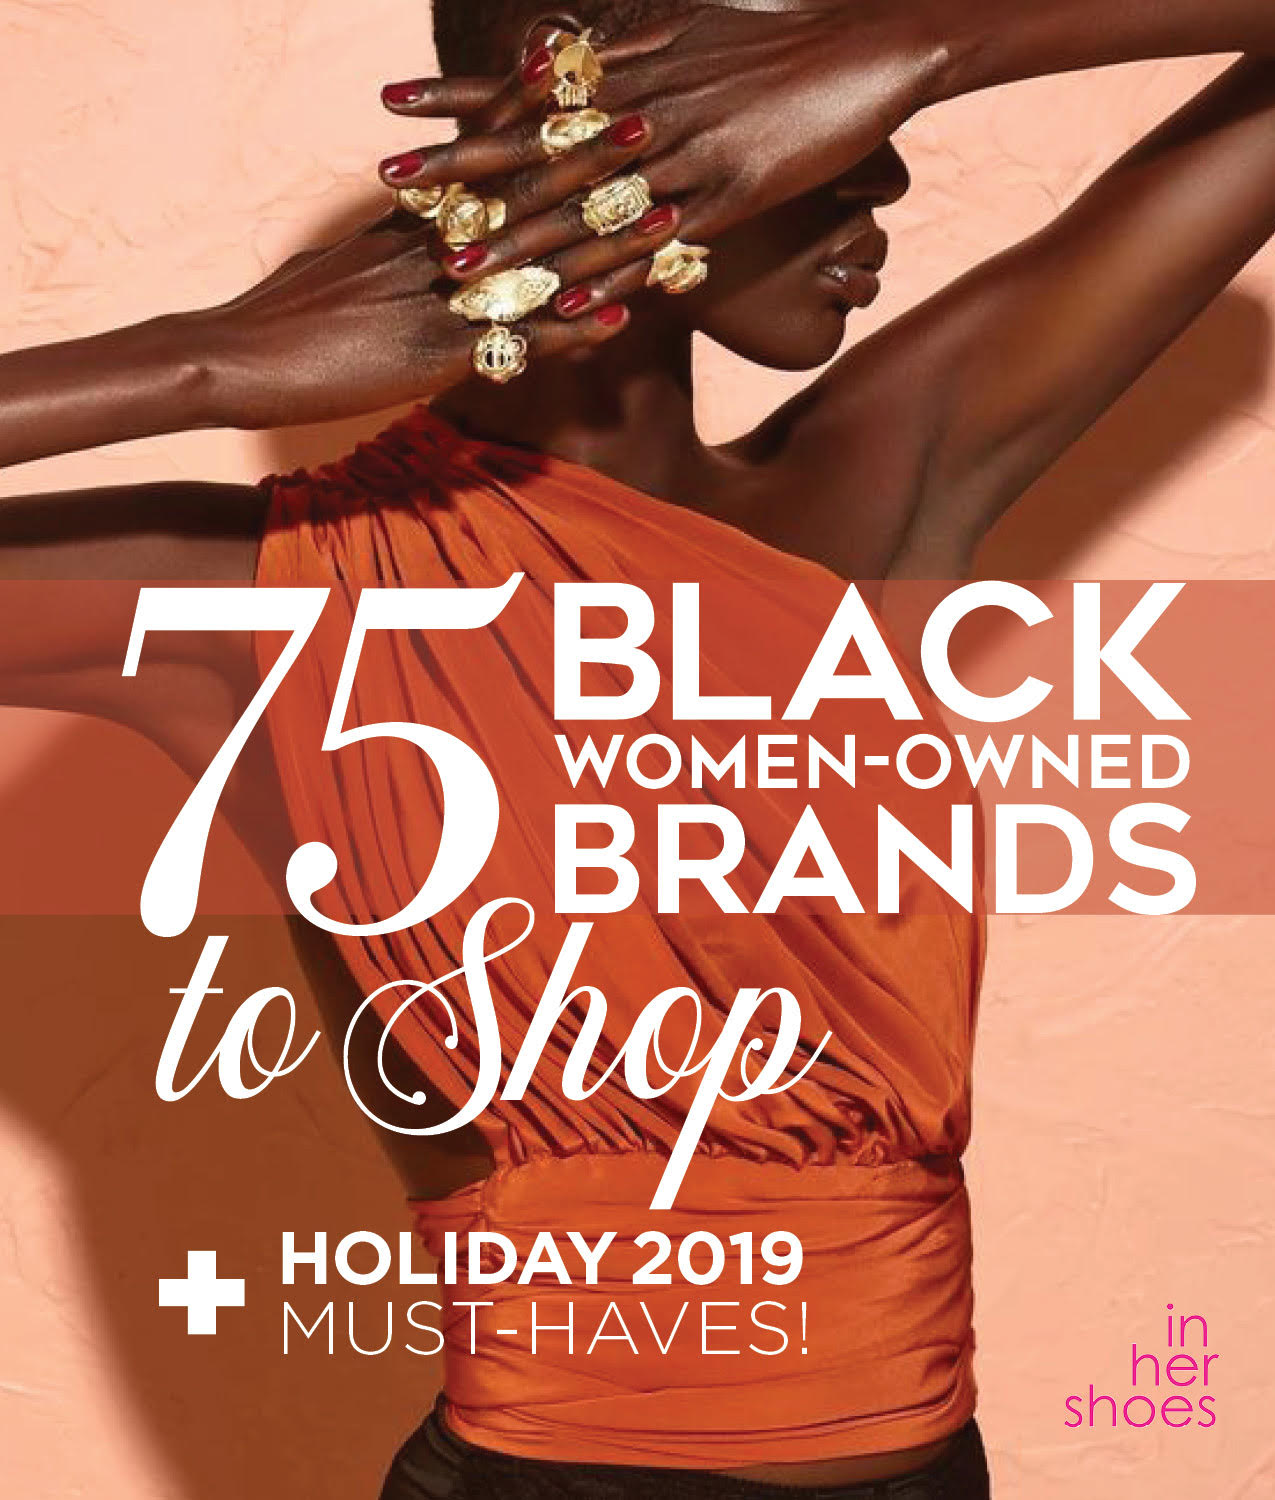 In Her Shoes 2019 Holiday Gift Guide: 75 Black Women-Owned Brands